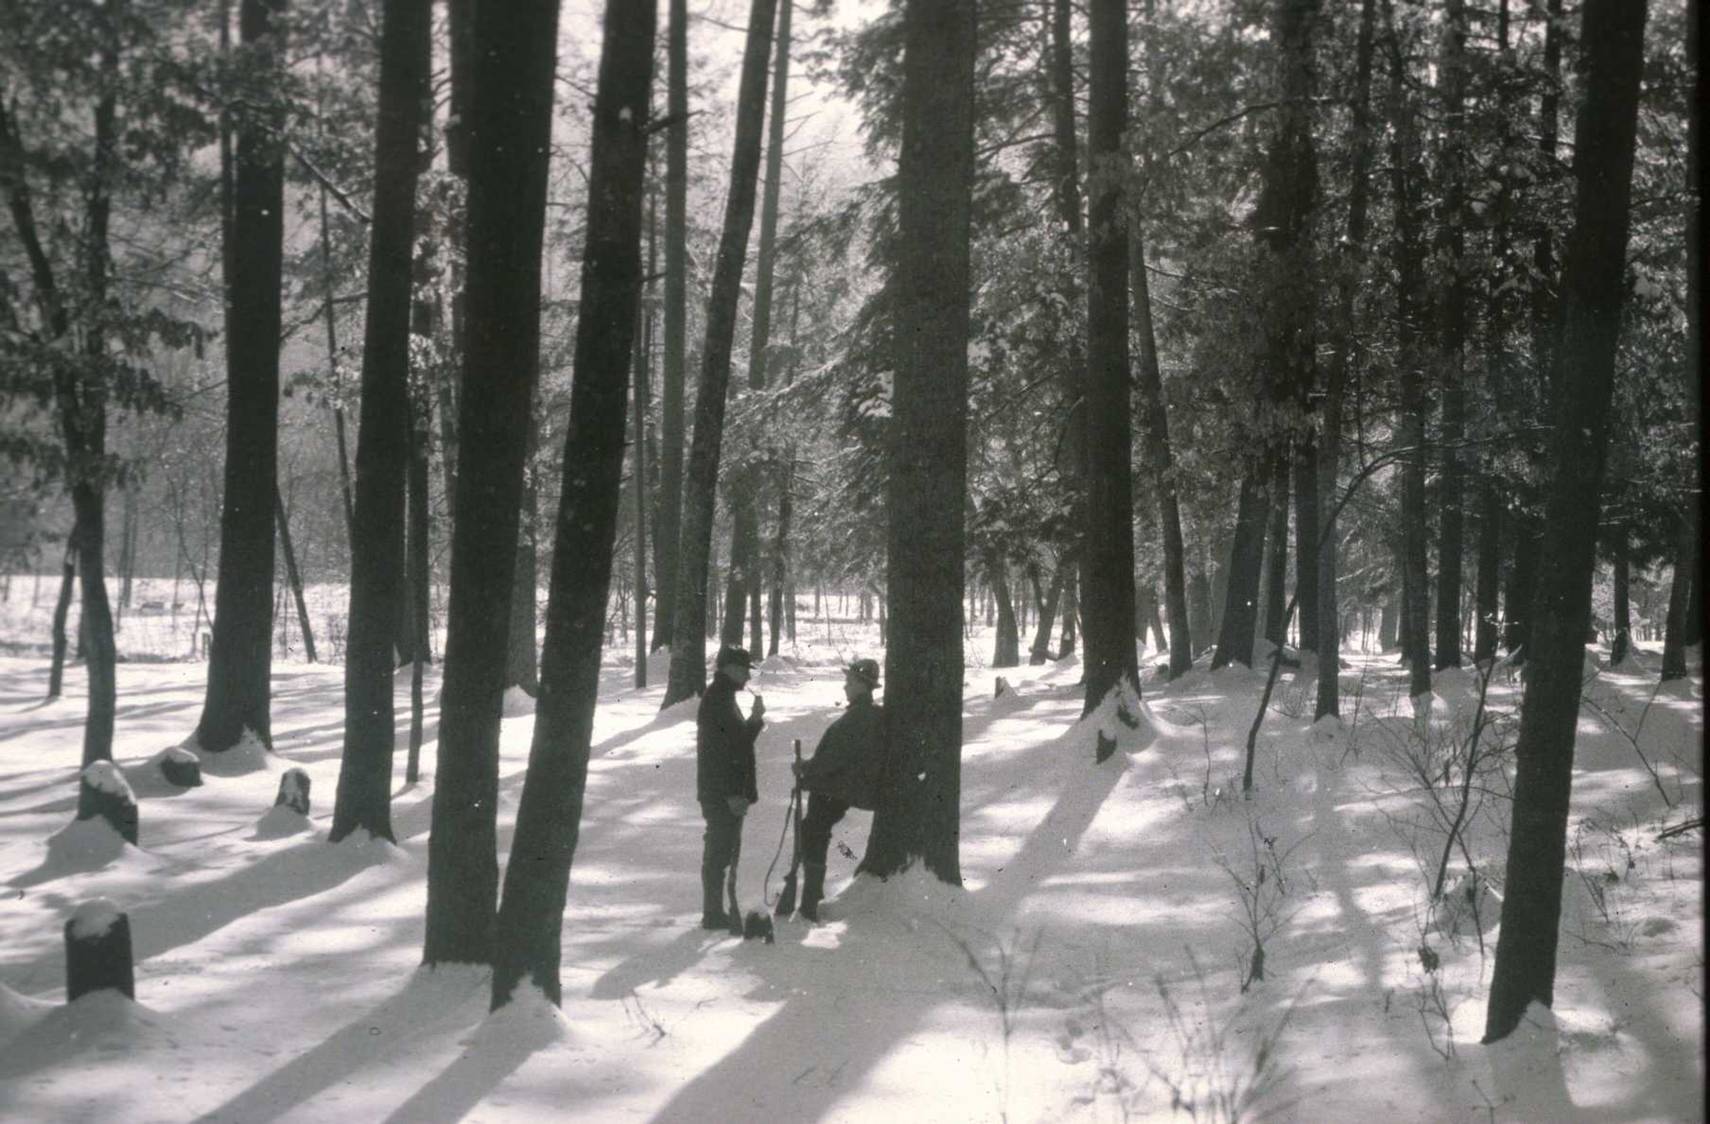 2 hunters standing in forest in snow - black and white photo